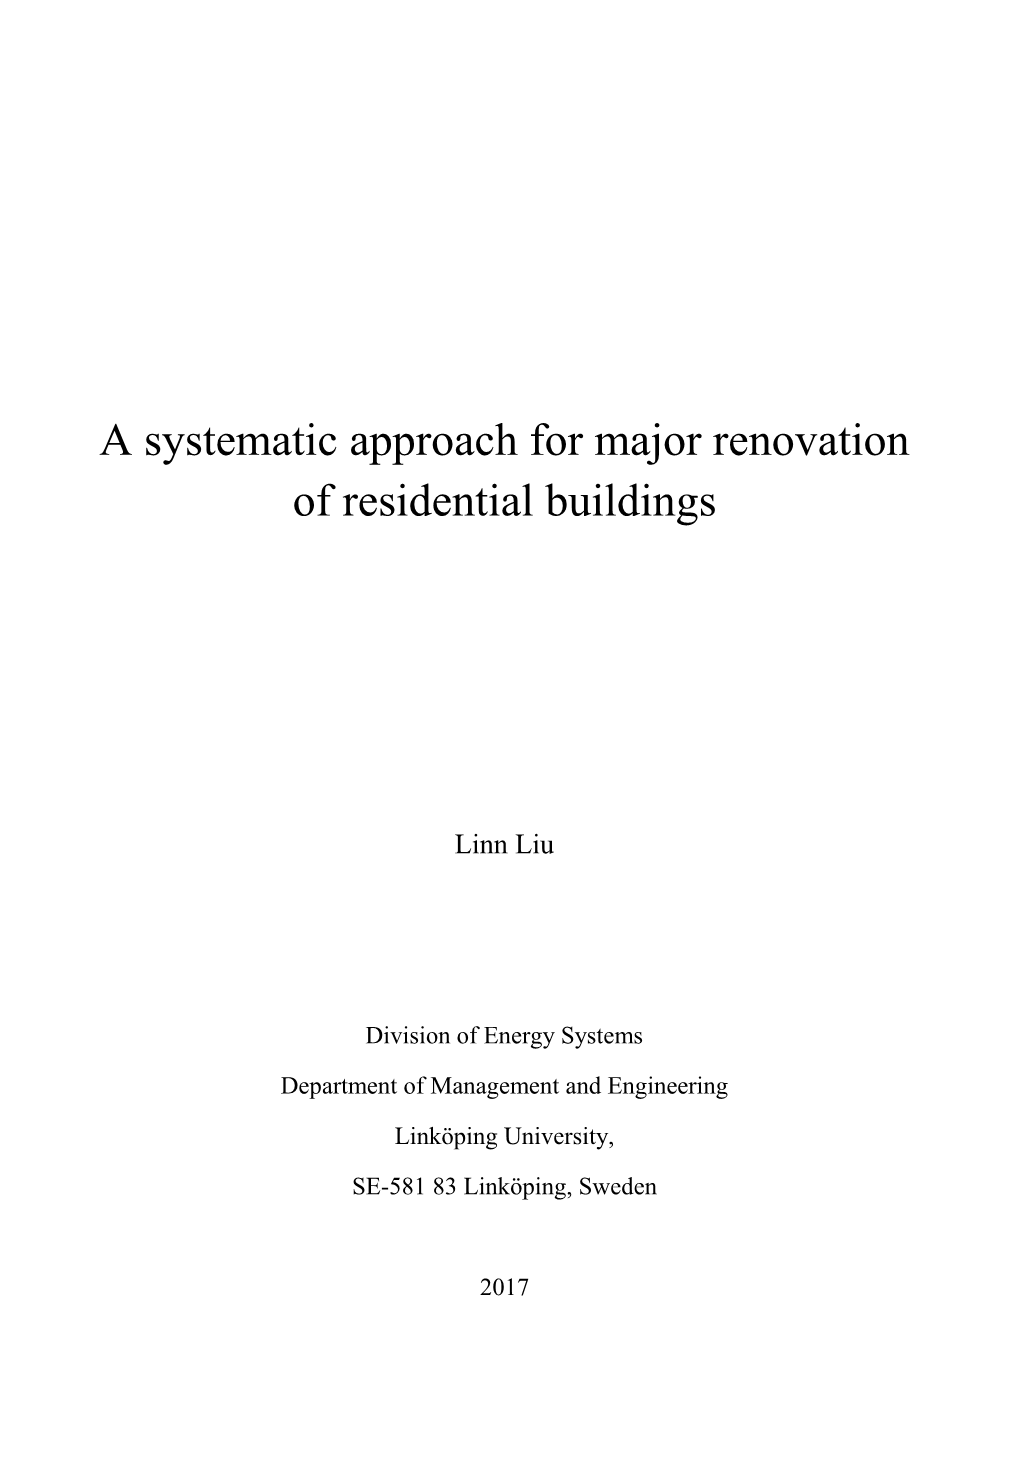 A Systematic Approach for Major Renovation of Residential Buildings